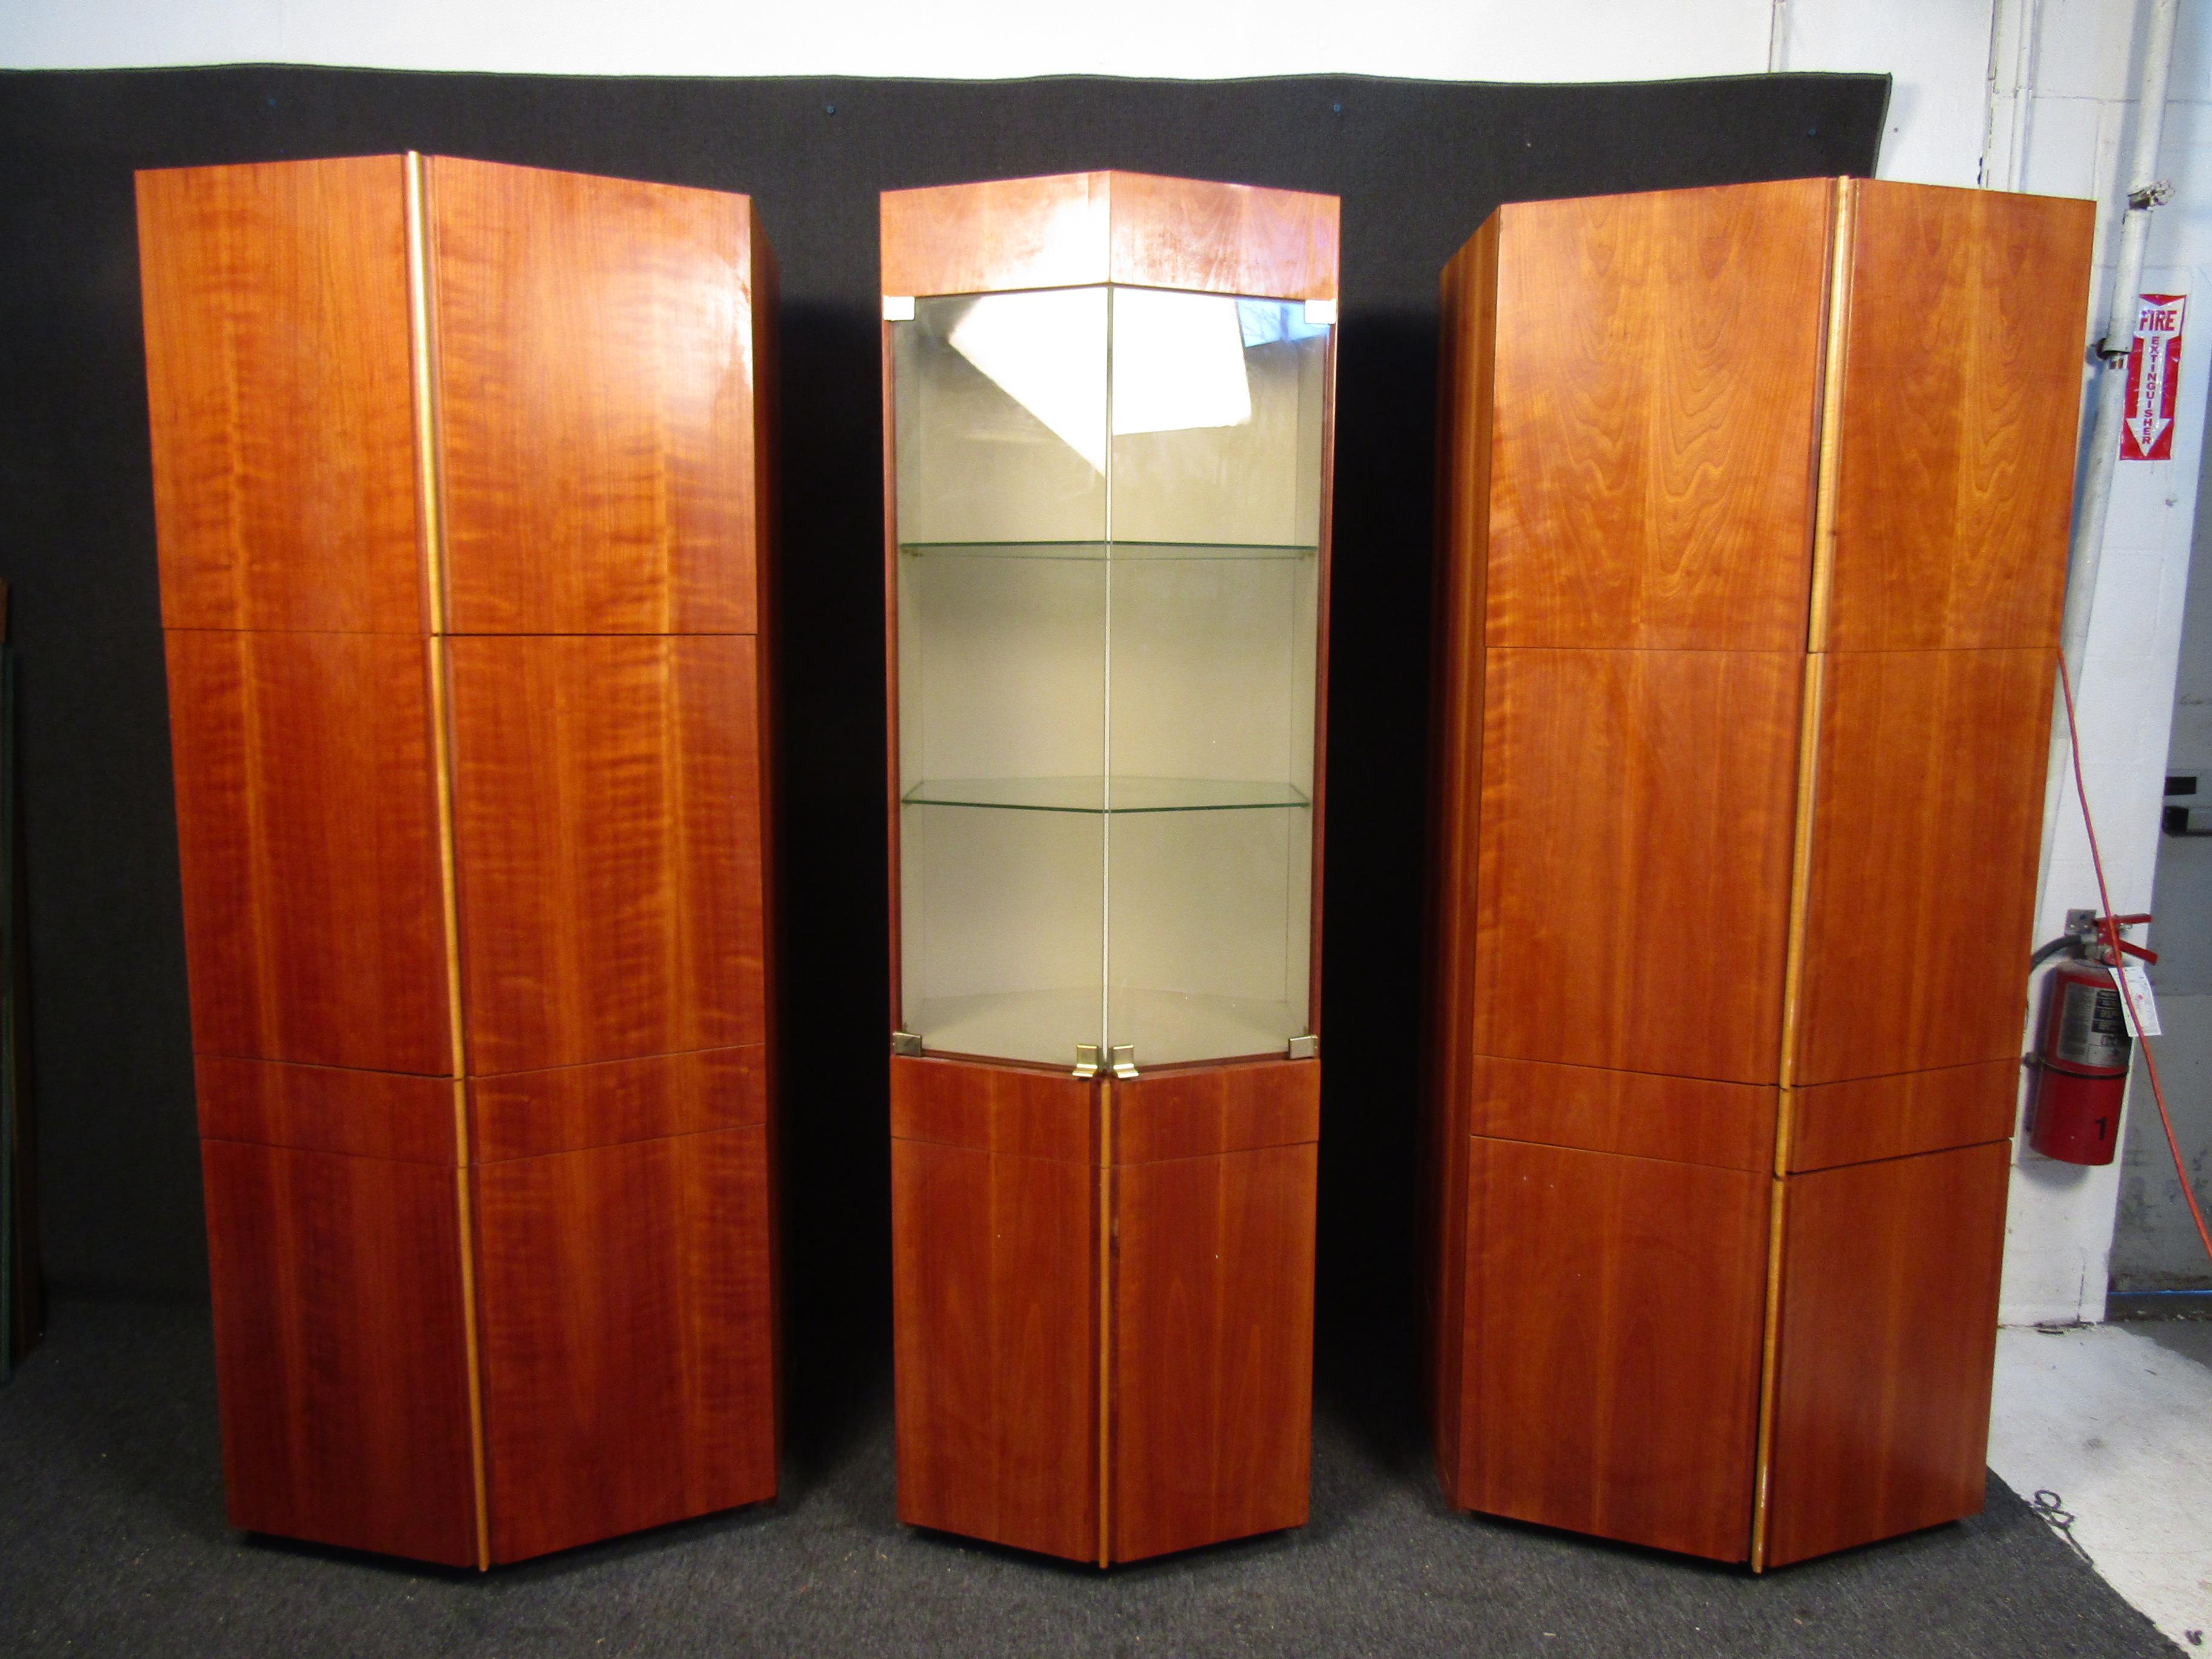 These unique Dillingham china cabinets come in a set of three. The two end cabinets are identical with all wood doors and glass shelving. The middle cabinet features two glass doors and a light up show area. If you are looking to furnish a dining